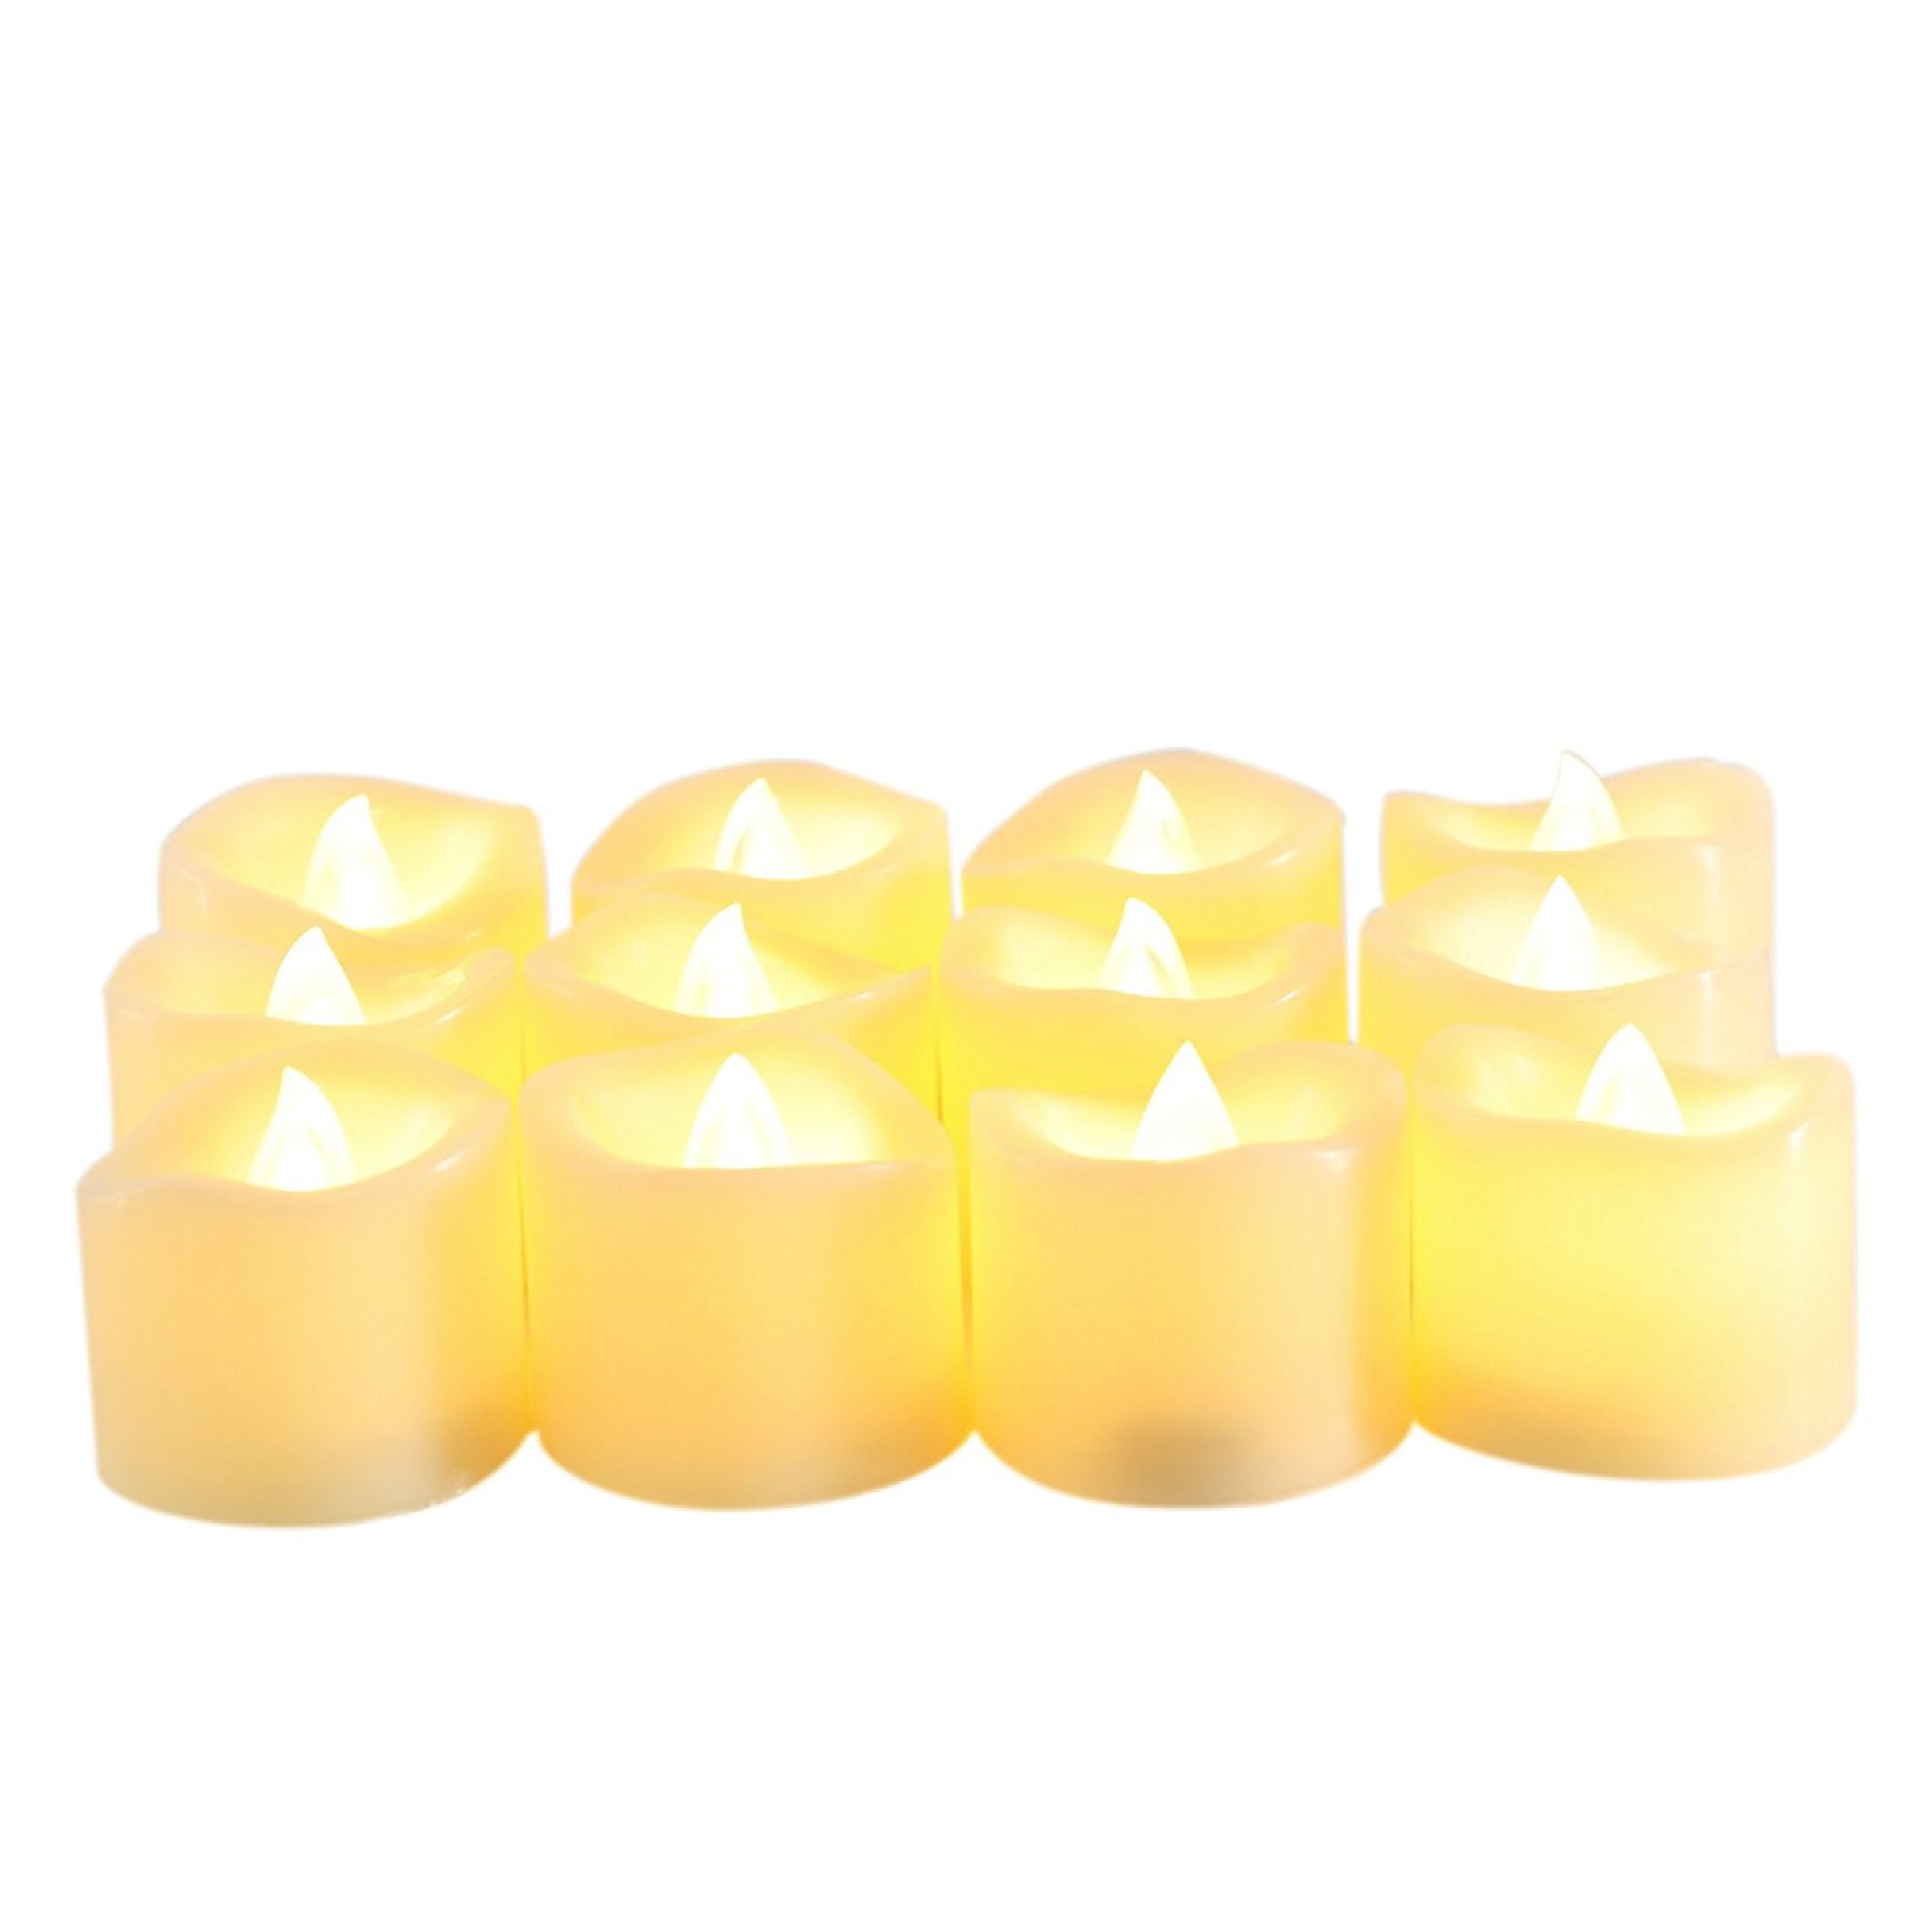 CANDLE CHOICE Battery Operated Flameless Tea Lights with Timer Realistic Flickering Fake Electric LED Tealight Candles Set for Halloween Christmas Party Wedding Decorations Batteries Included 6 Pack